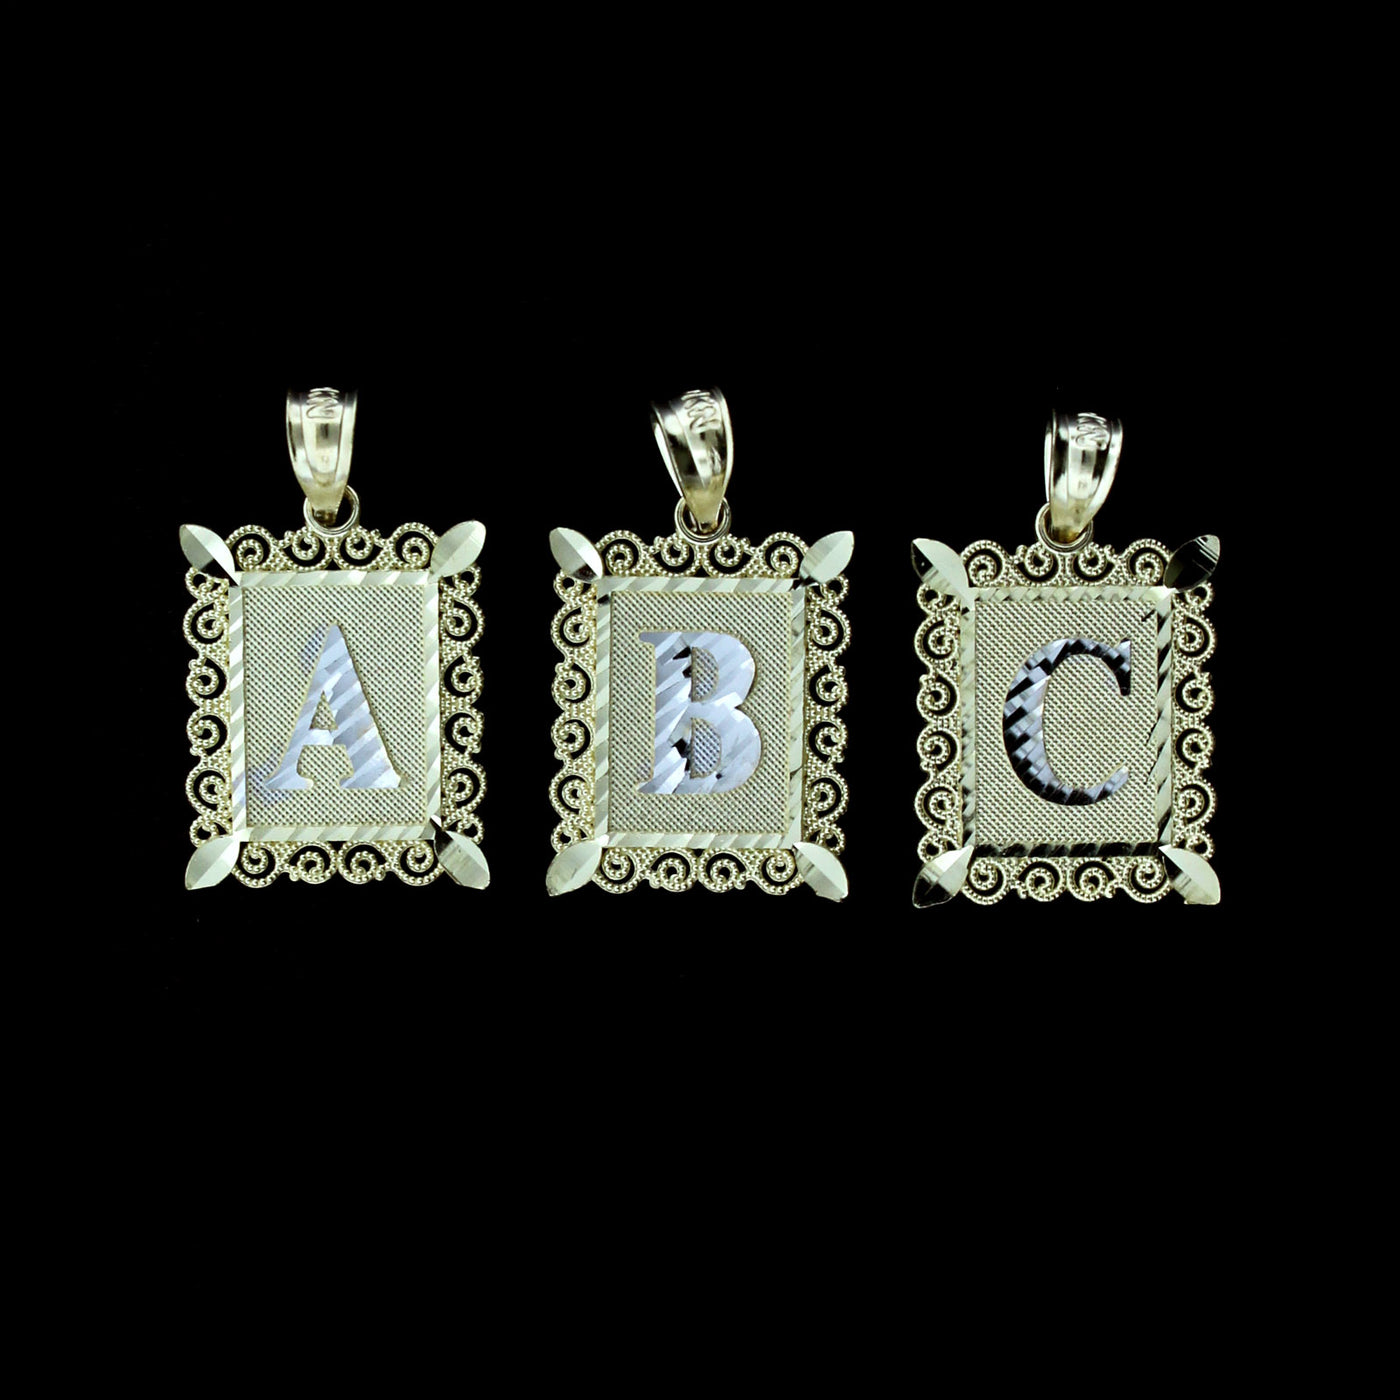 10K Solid Yellow Gold Large Initial Letter Plate Pendant A-Z Alphabet Necklace Charm